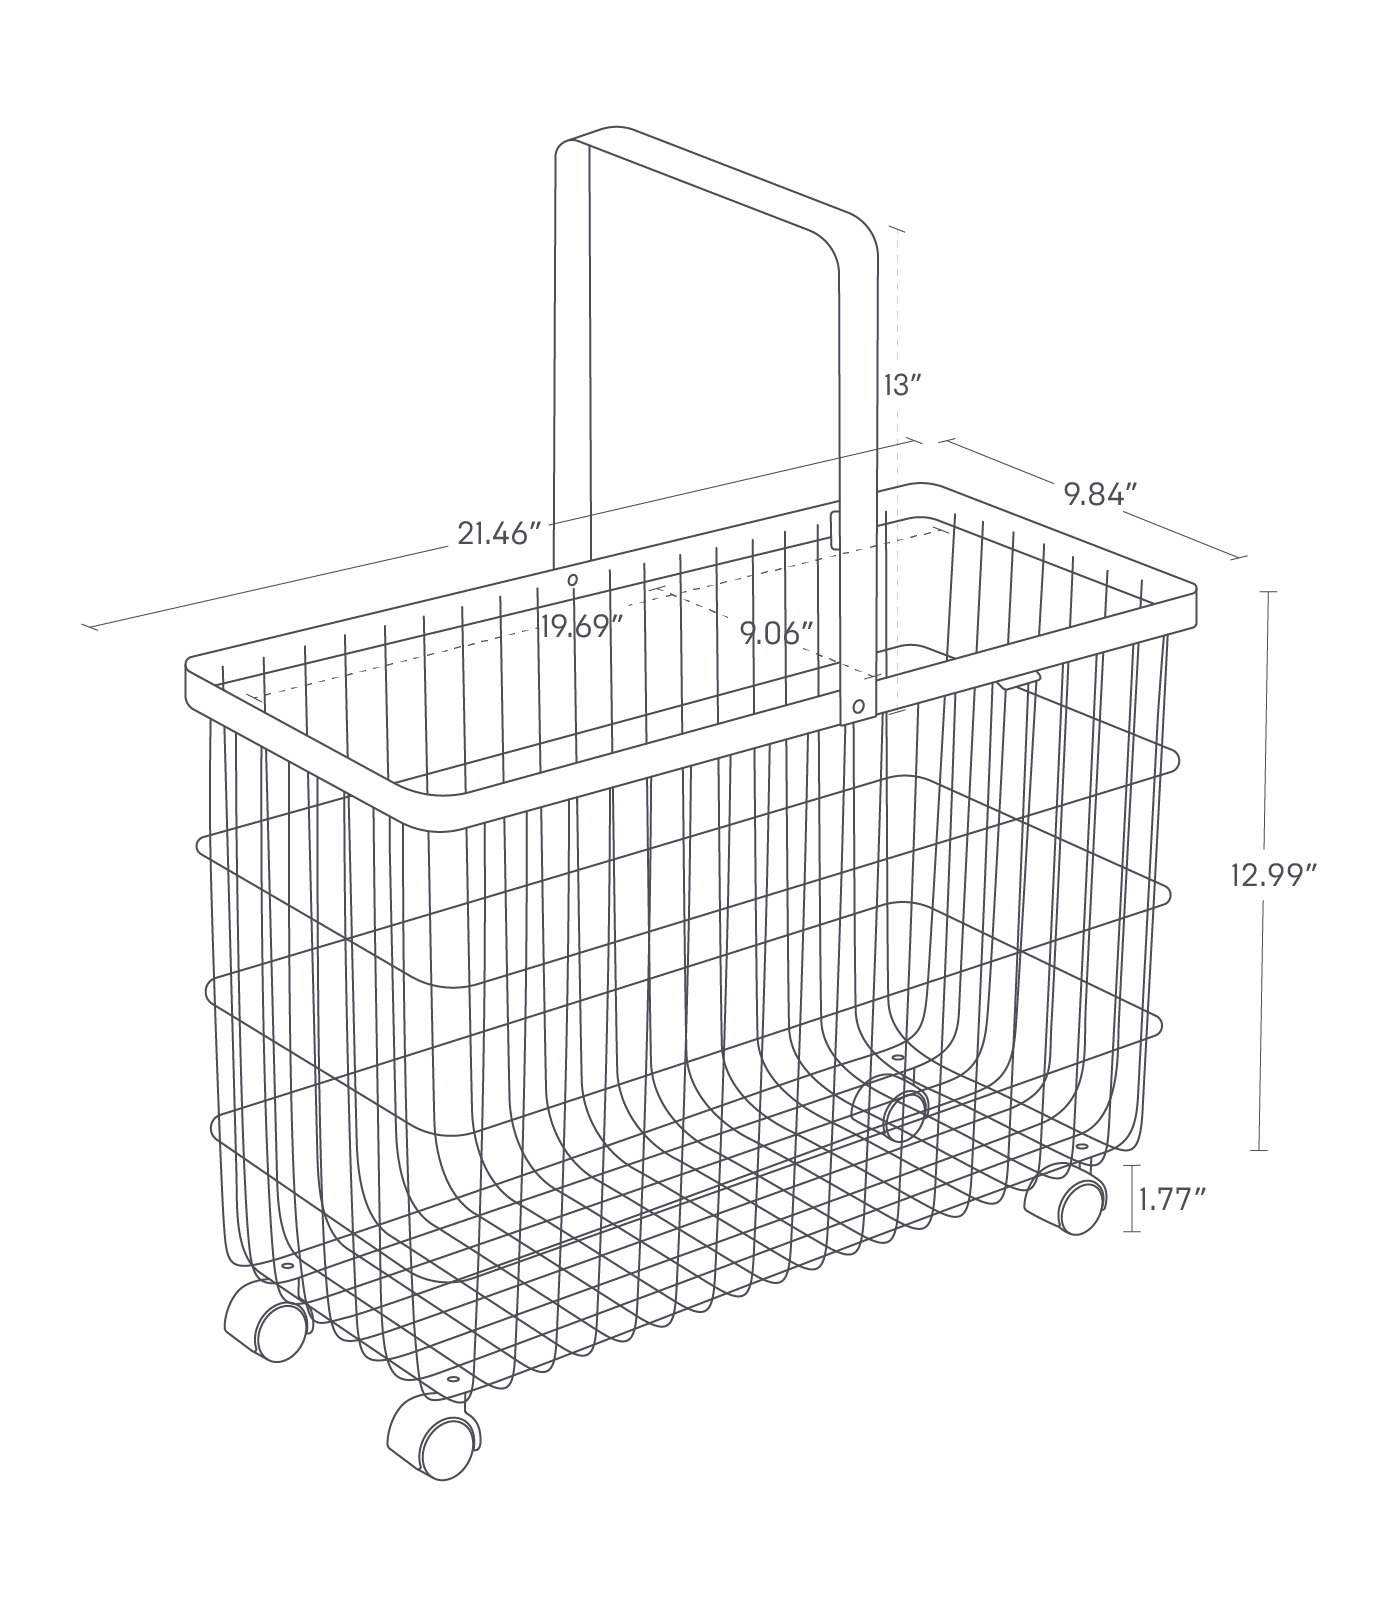 TOWER Rolling Wire Basket. Total product height 14.8 inches. Outer basket length 21.46 inches, height 12.99 inches, width 9.84 inches. Inner basket length 19.69 inches, 9.06 inches wide. Casters 1.77 inches tall. Handle 13 inches tall.